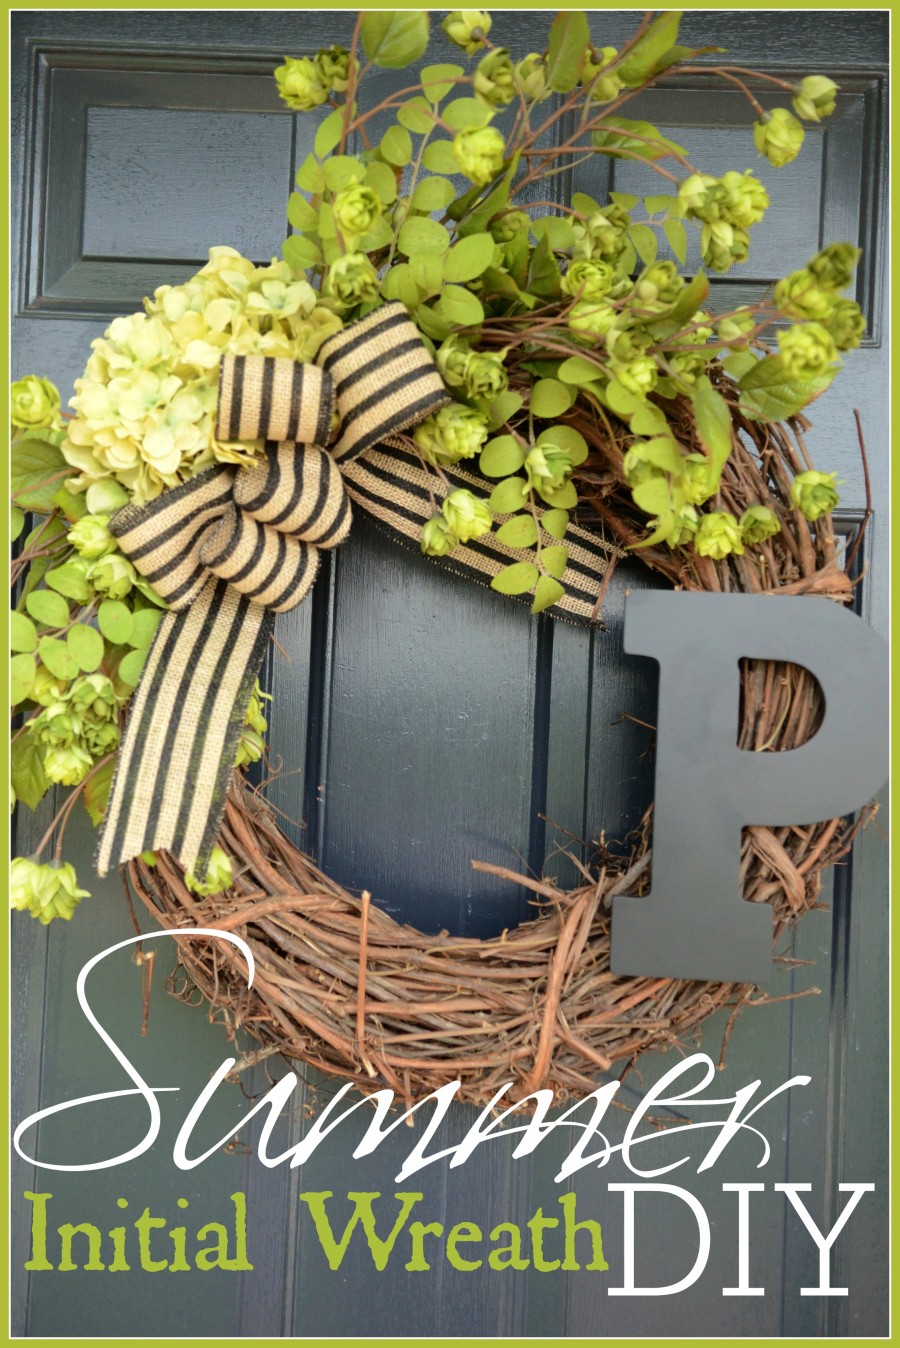 SUMMER-INITIAL-WREATH-TITLE PAGE-stonegbleblog.com